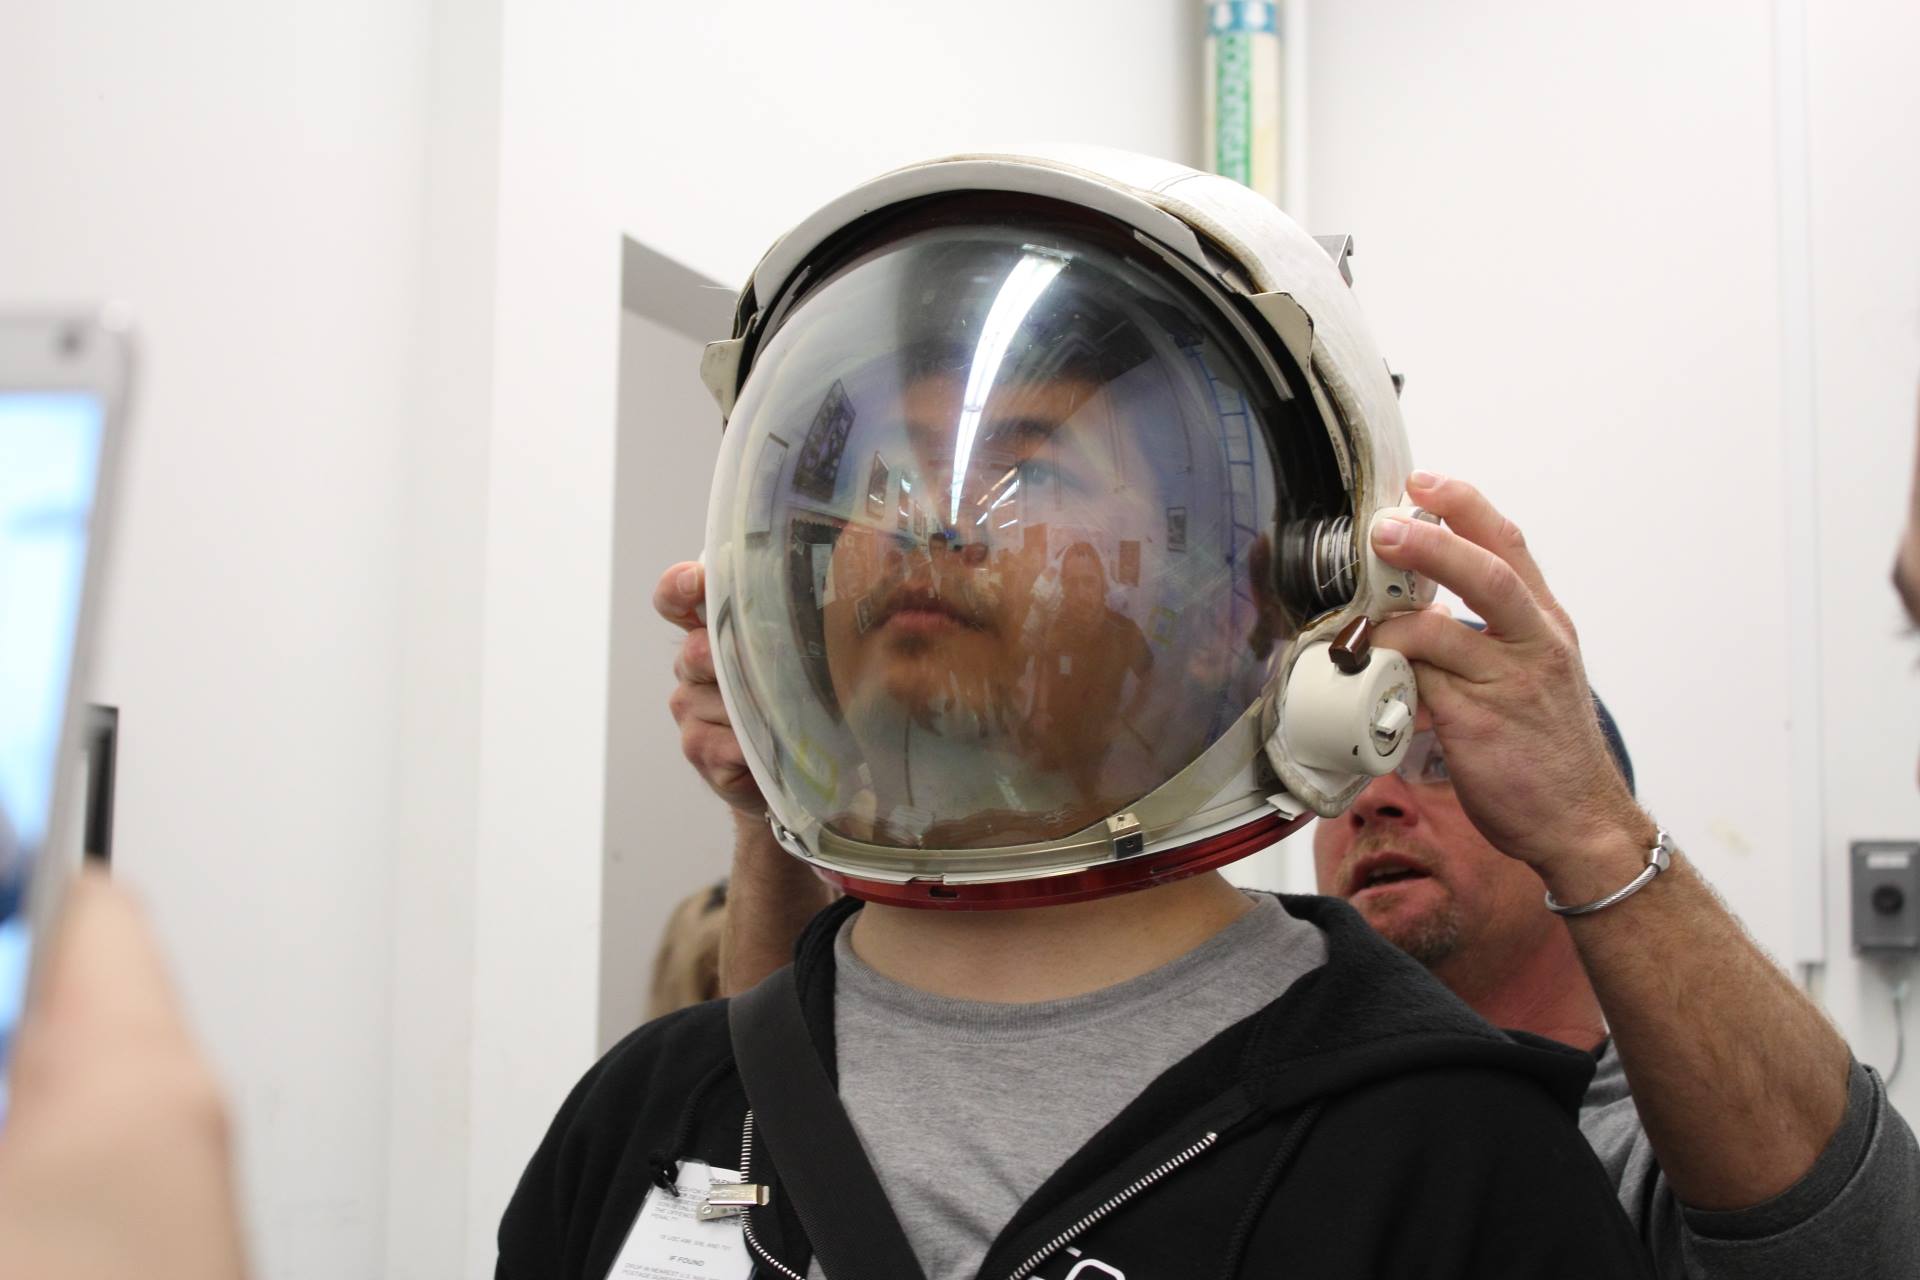 Trying on a spacesuit helmet at NASA’s Johnson Space Center helps Norman Wang assess an astronaut’s field of vision.